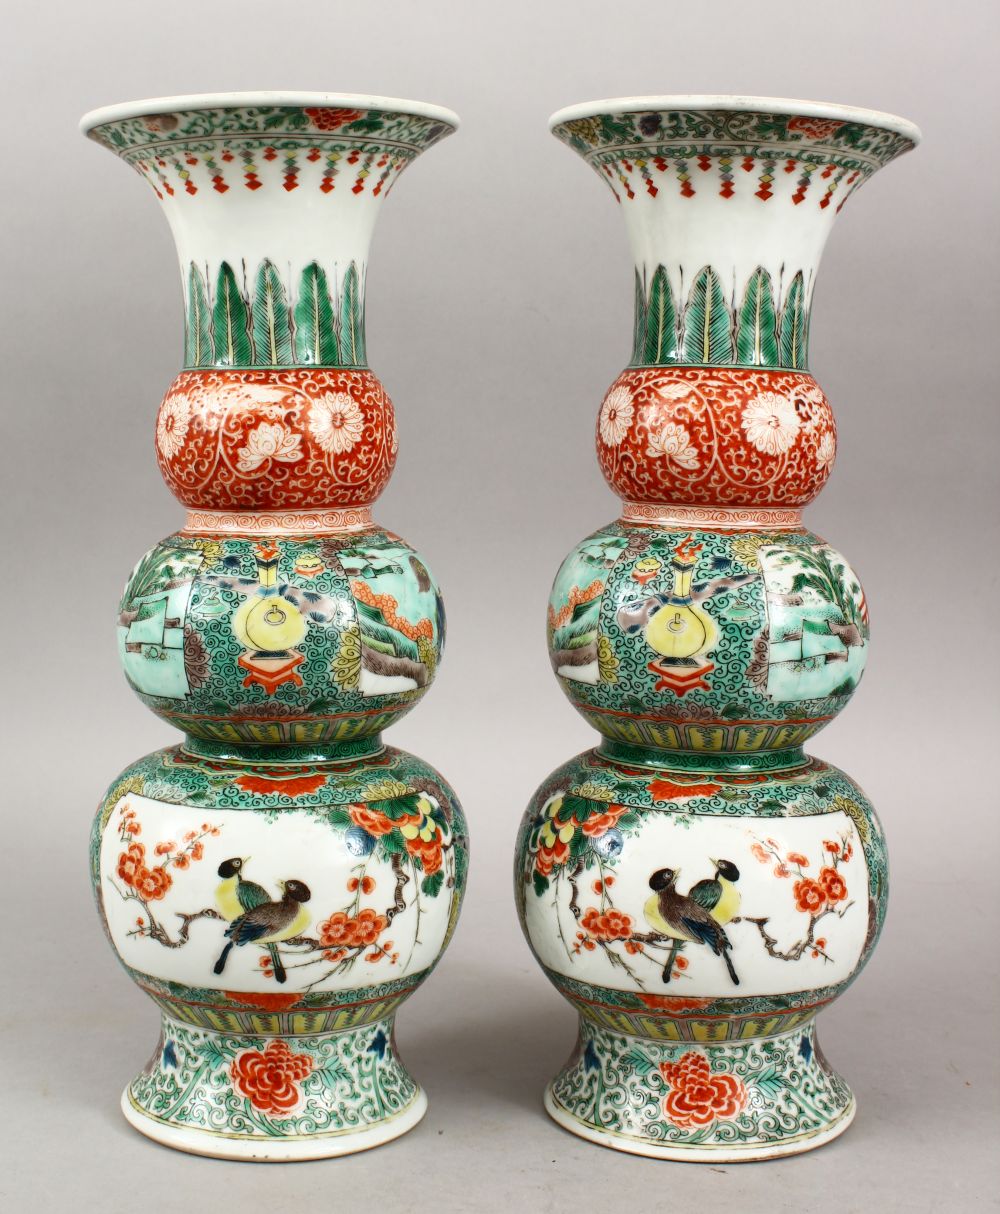 A PAIR OF CHINESE FAMILLE VERTE TRIPLE GOURD PORCELAIN VASES, decorated with panels of lion dogs